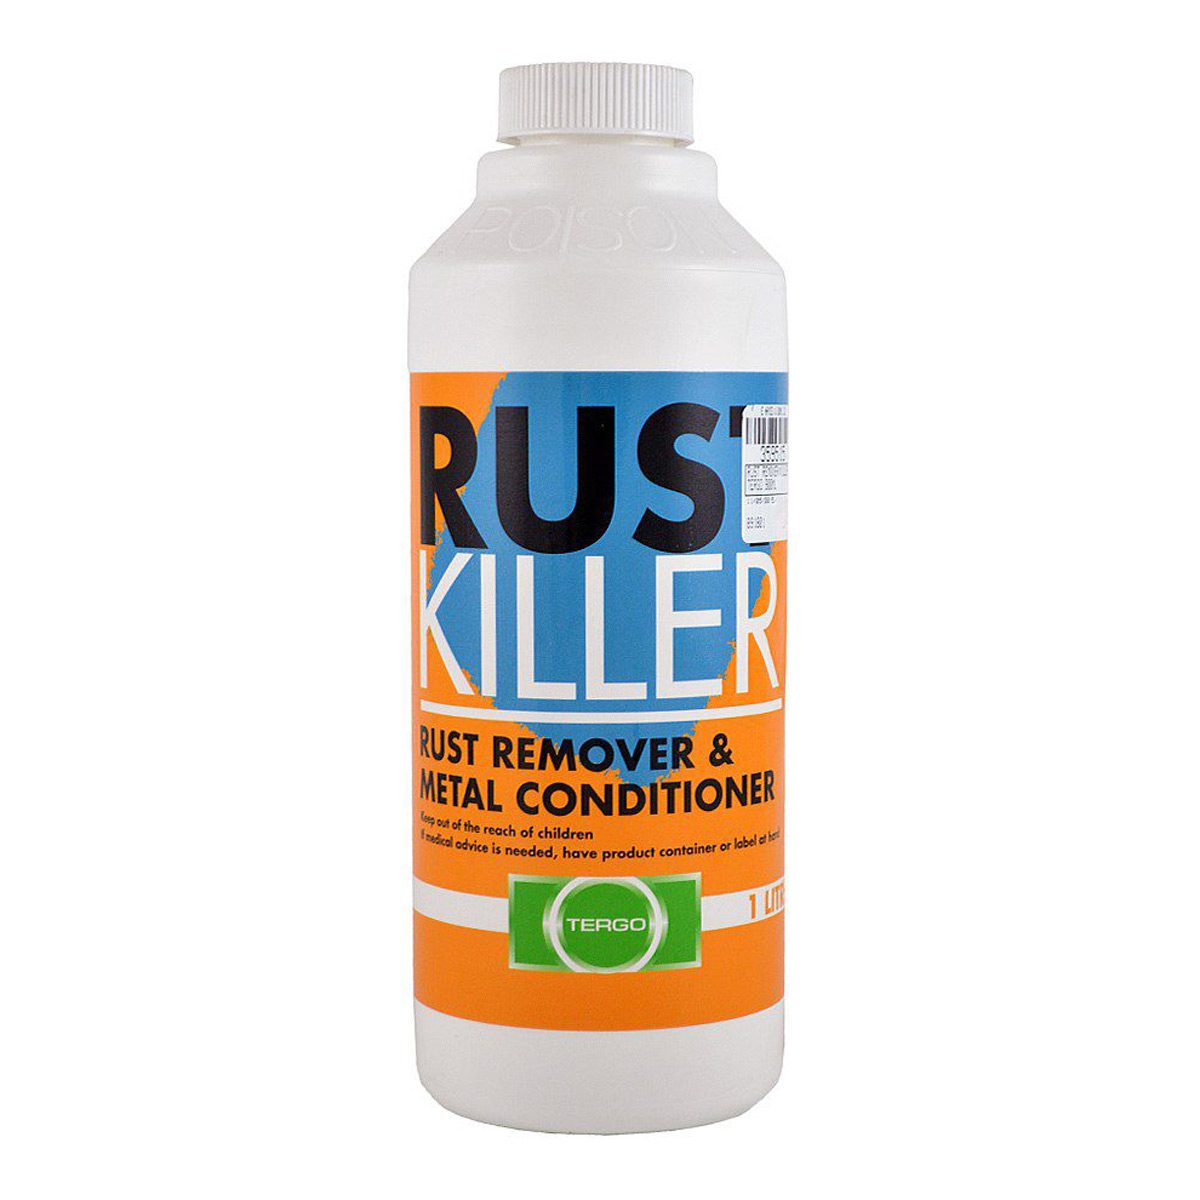 cleaning-products-industrial-specialist-rust-killer-1L-litre-phosphoric-acid-based-cleaner-containing-detergents-solvents-corrosion-inhibitor-aluminium-galvanised-iron-mild-steel-vjs-distributors-1096900